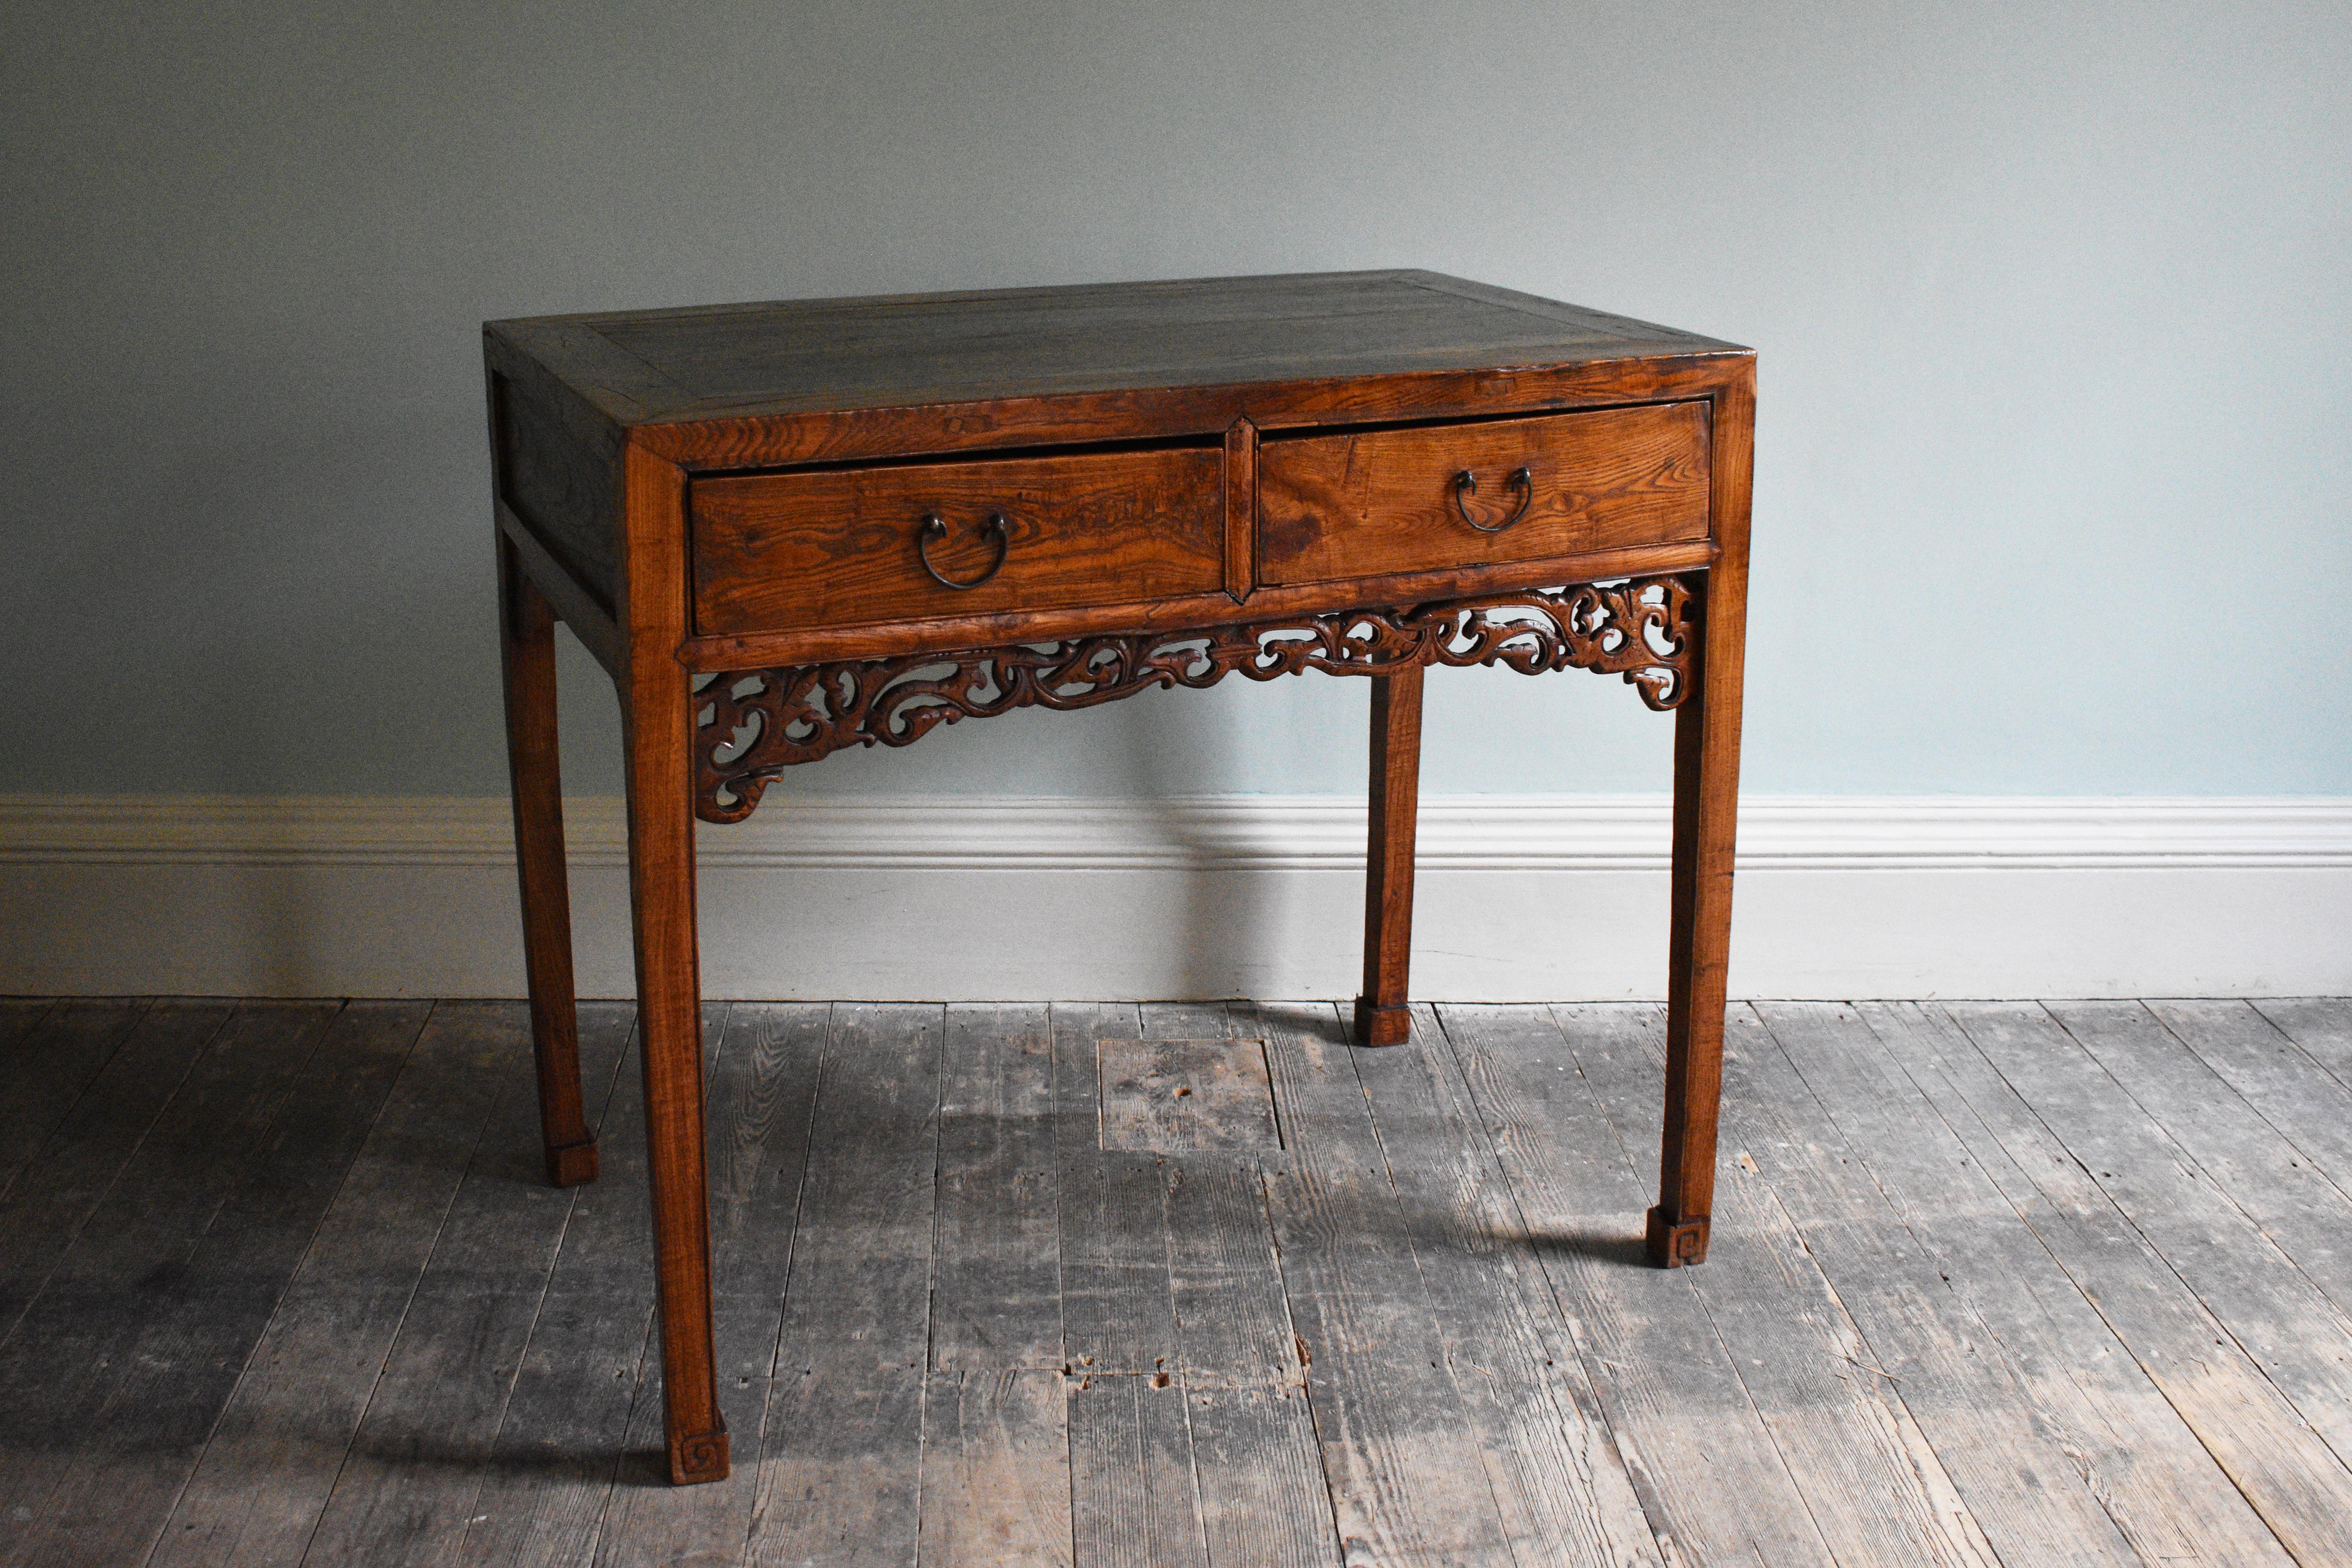 An elegant Chinese side table with ornate open carving flanking two front drawers, 19th century. 

Dimensions: H90 x W101.5 x D62.5 cm.